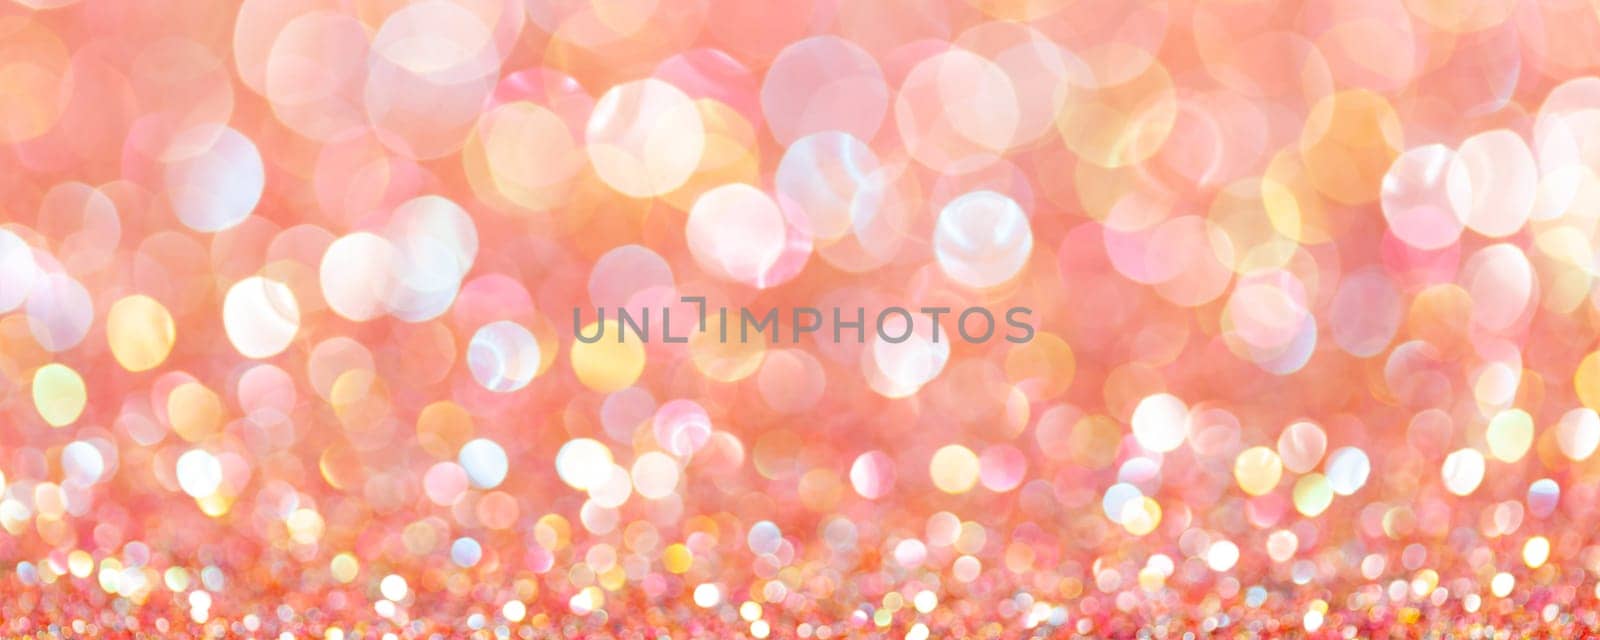 sparkles of rose glitter abstract background. Copy space, banner by glavbooh